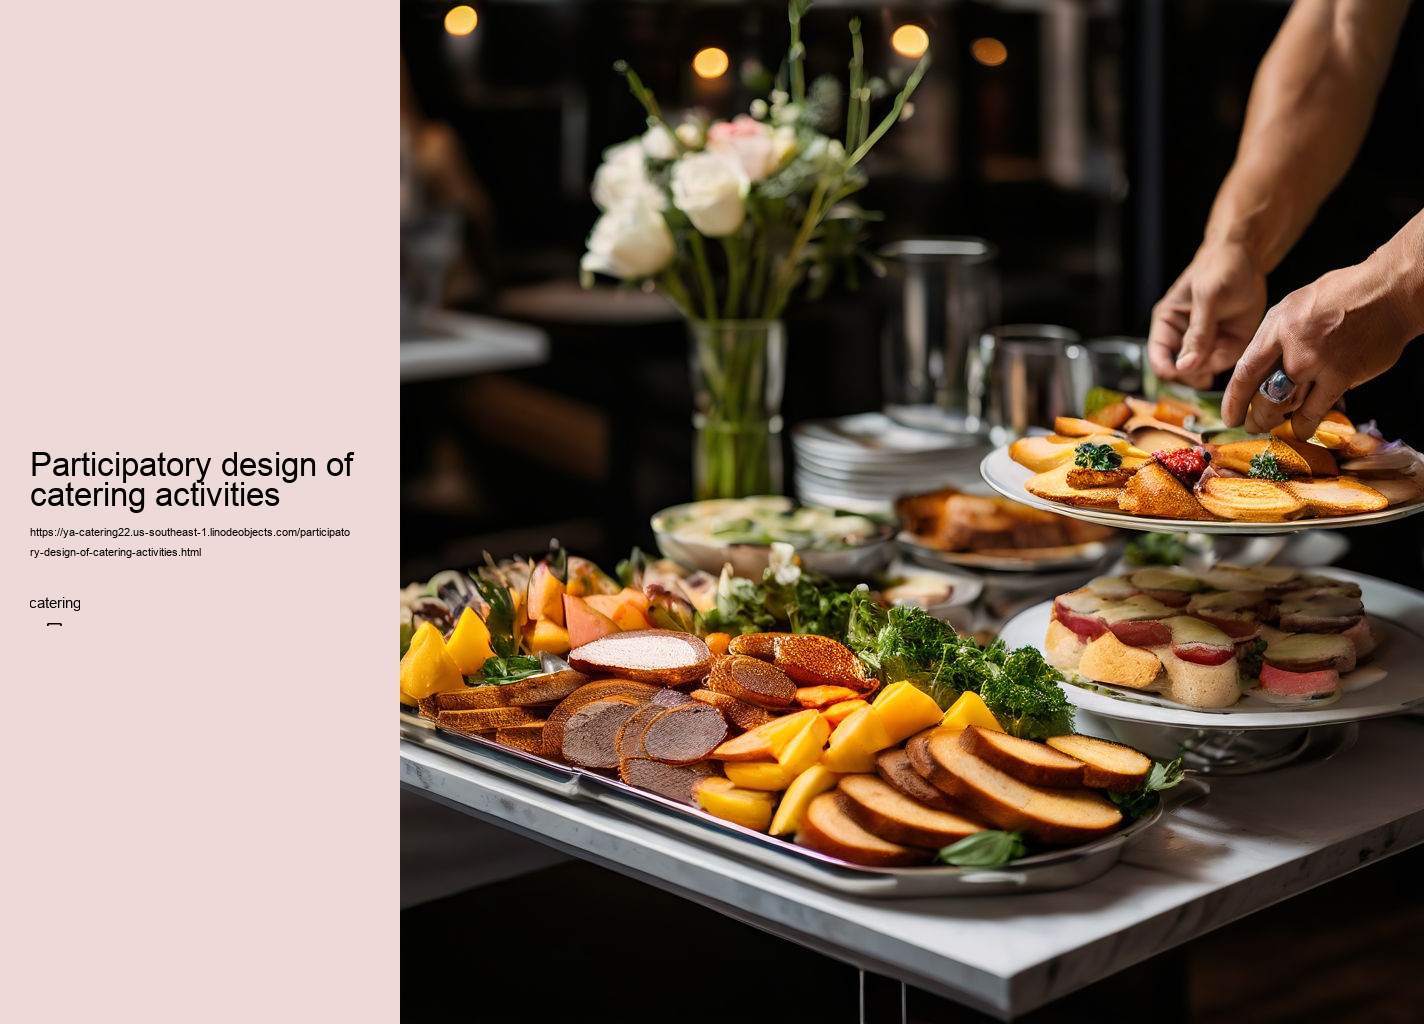 Participatory design of catering activities